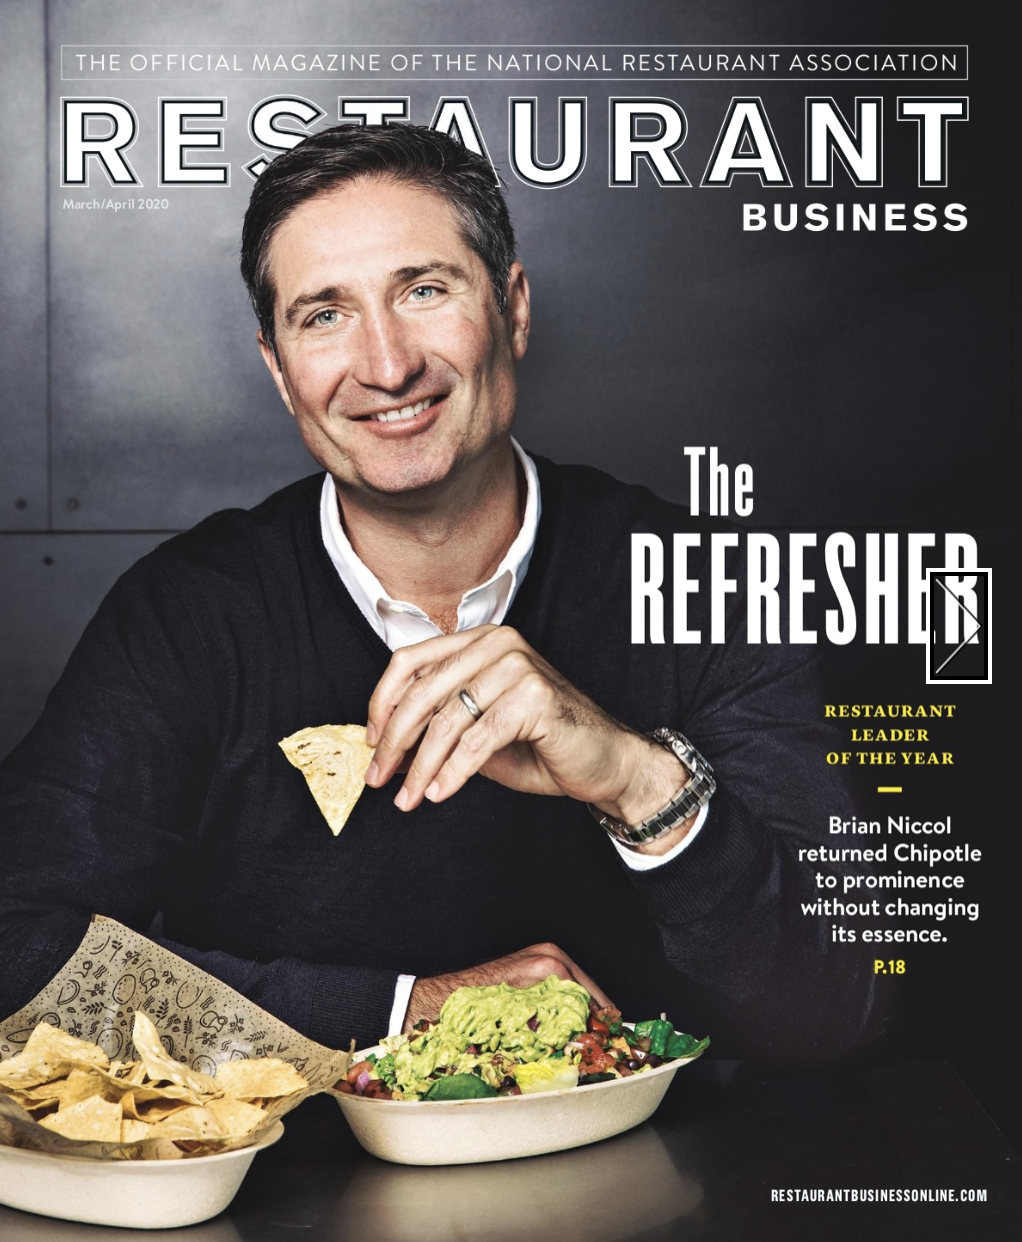 Restaurant Business Magazine March/April 2020 Issue